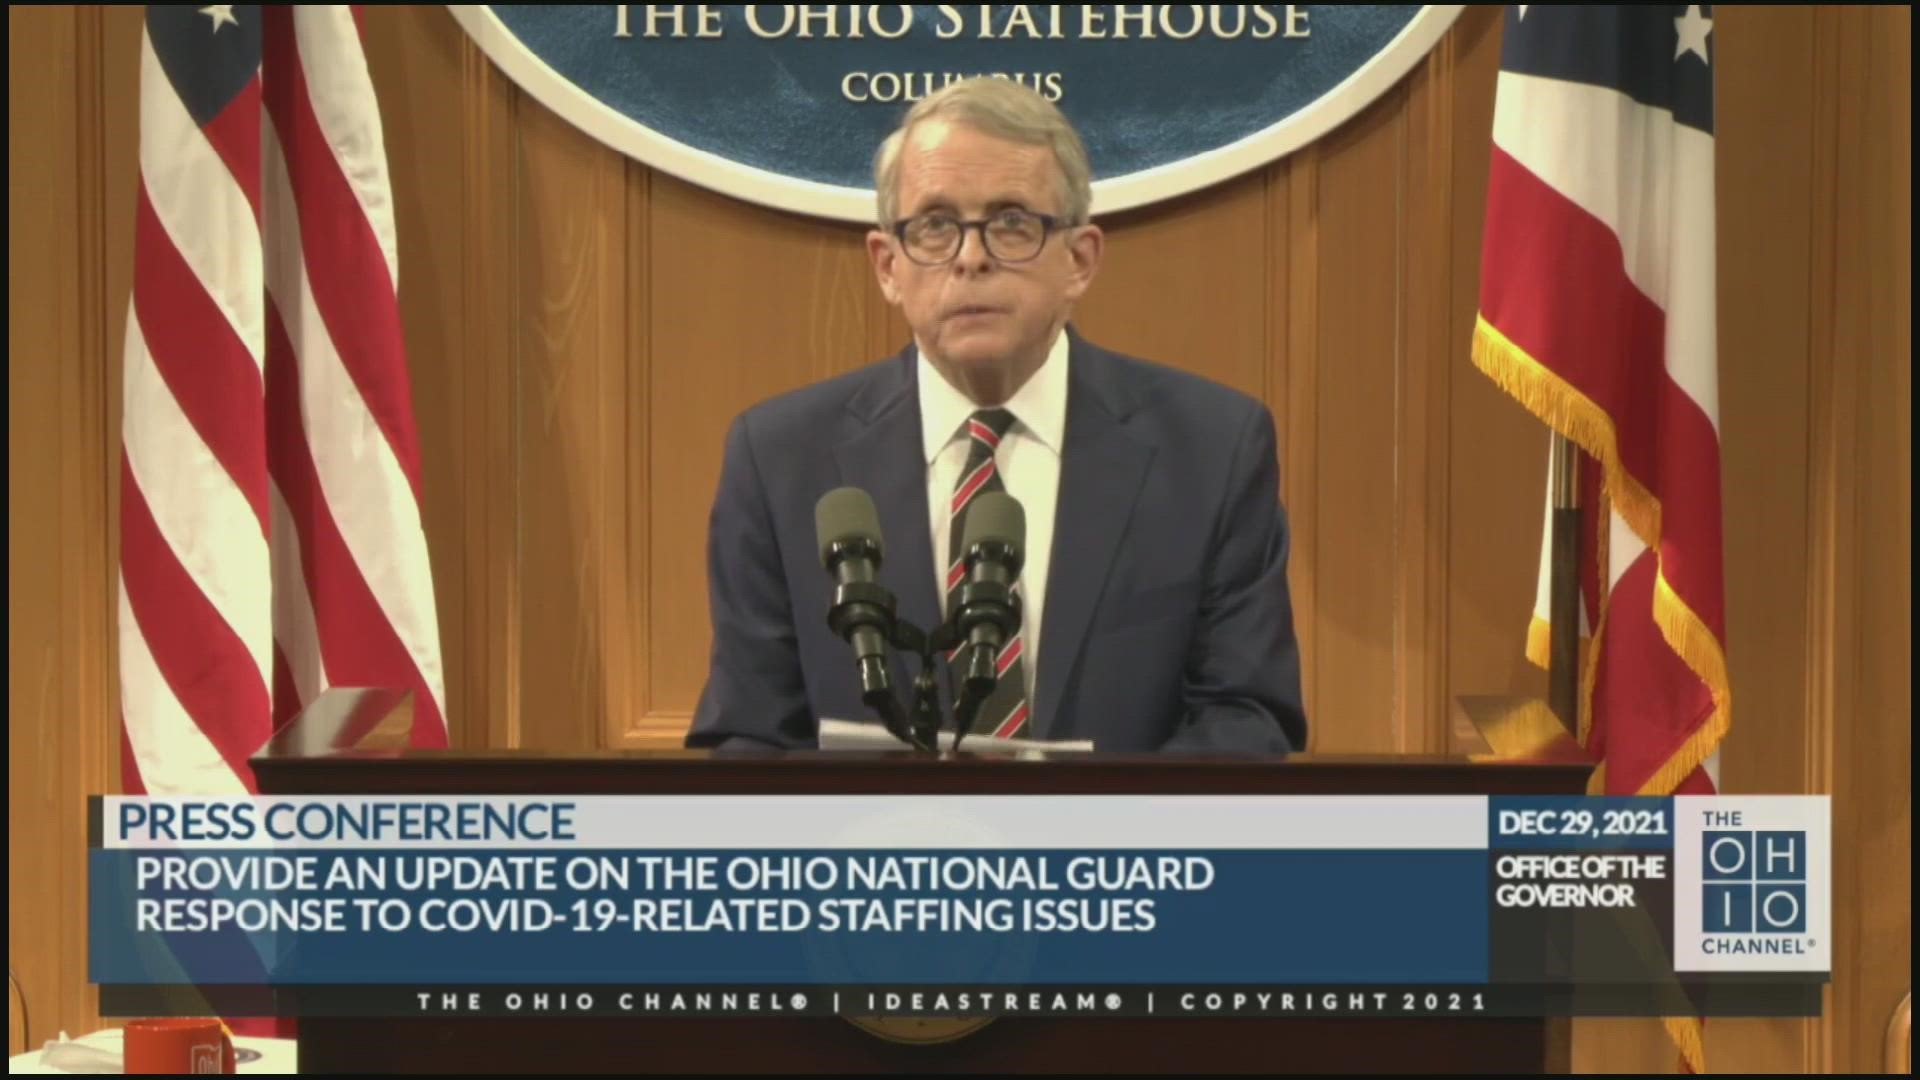 Governor Mike DeWine provided an update on the Ohio National Guard’s response to a surge of COVID-19 hospitalizations in the state.